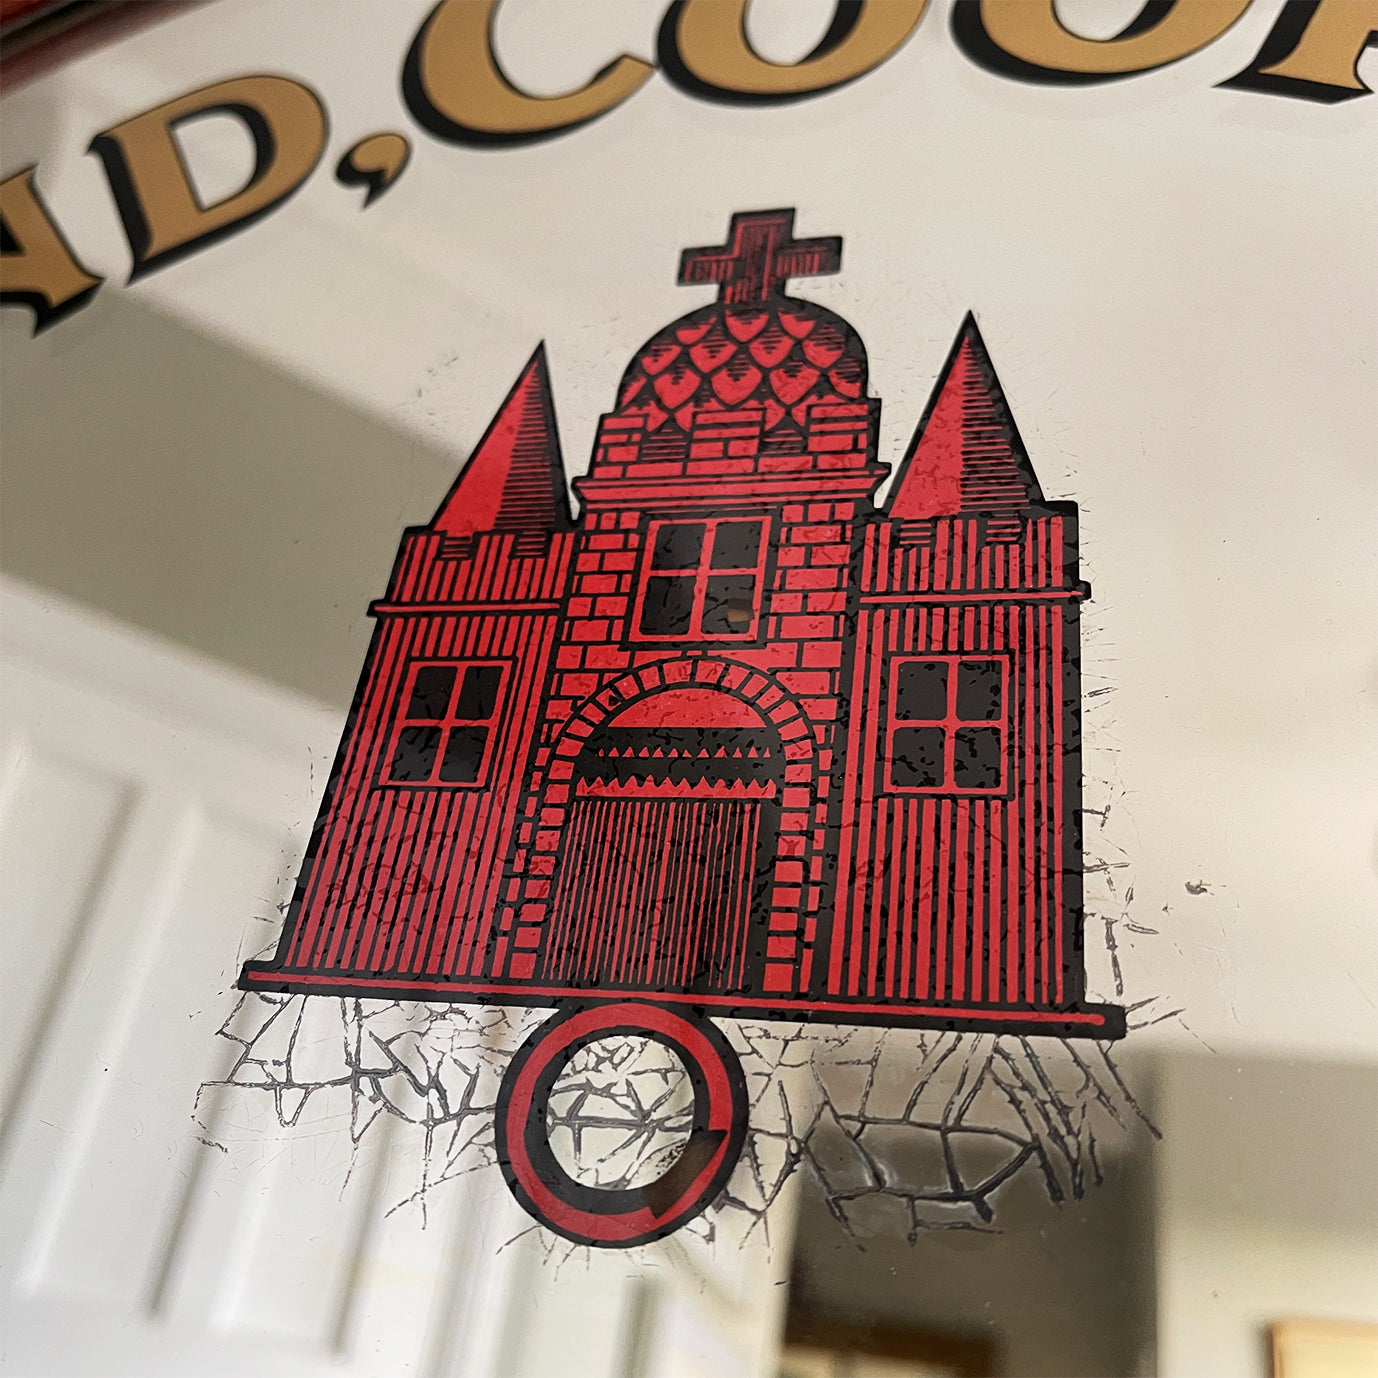 An Original Ind Coope's Pub Mirror with great foxing around the central red church. It has a rounded mahogany frame with the 'Ind Coope & Co Ltd' stamp in. A fine example of brewery advertising - SHOP NOW - www.intovintage.co.uk